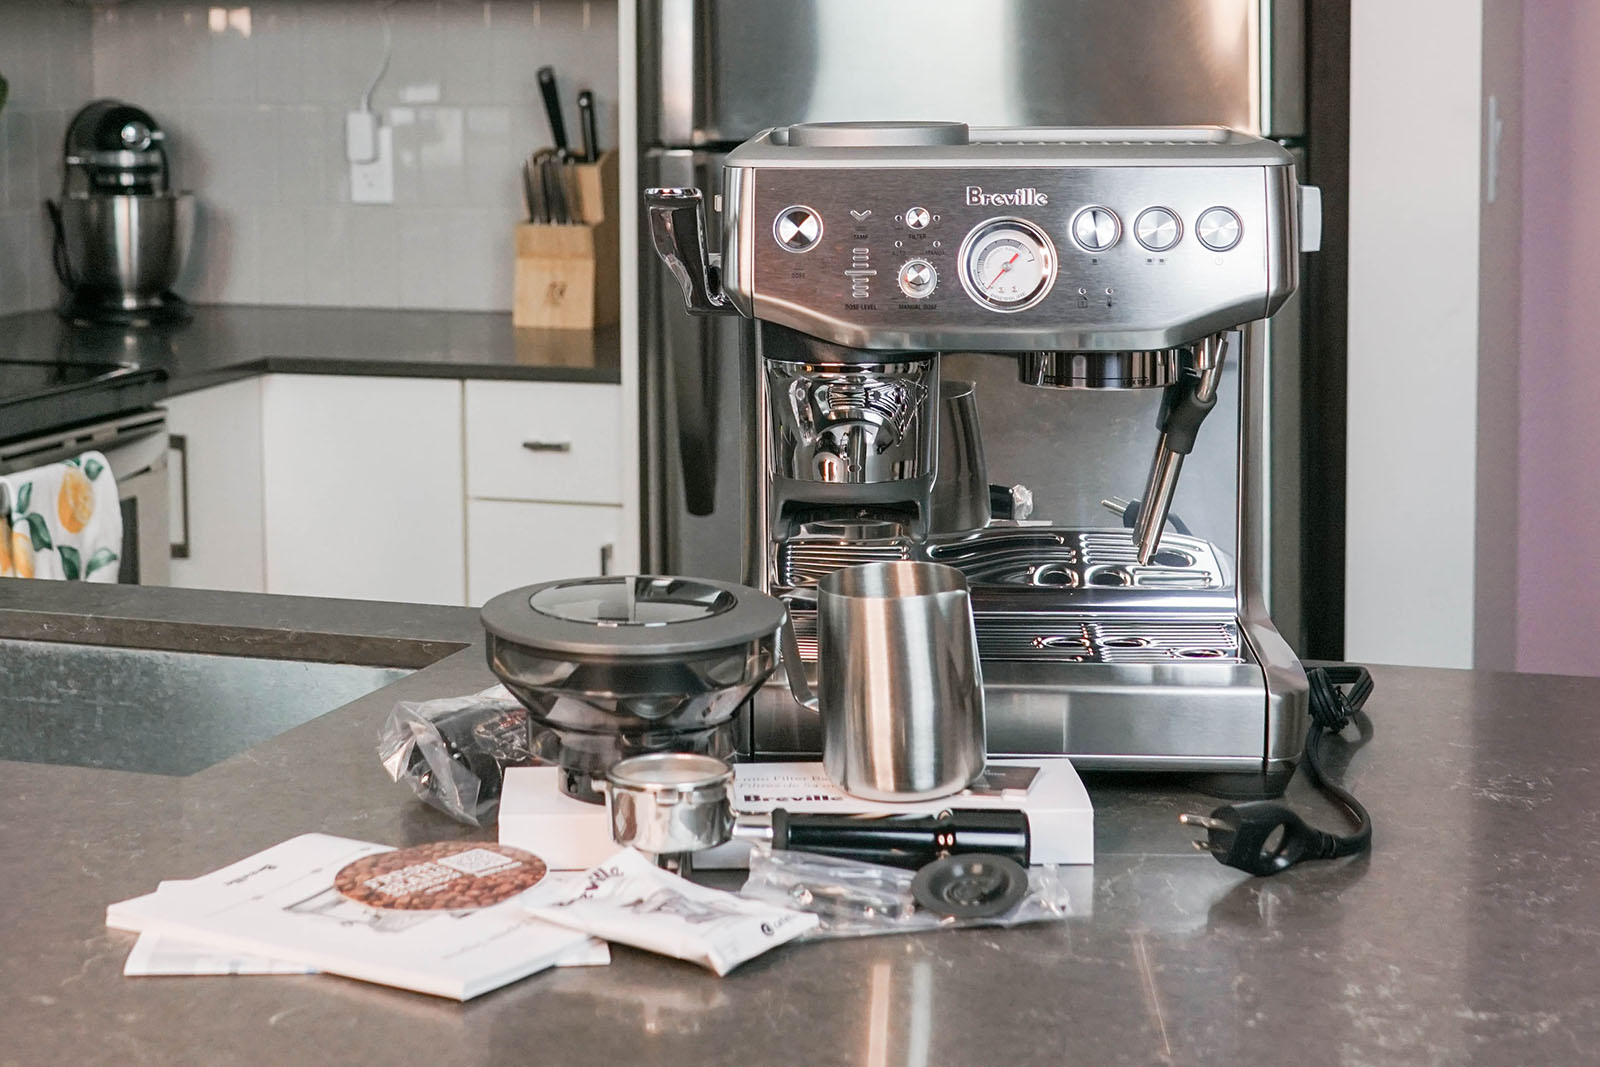 https://blog.bestbuy.ca/wp-content/uploads/2022/11/Breville-Barista-Express-Impress-review-whats-in-the-box.jpg